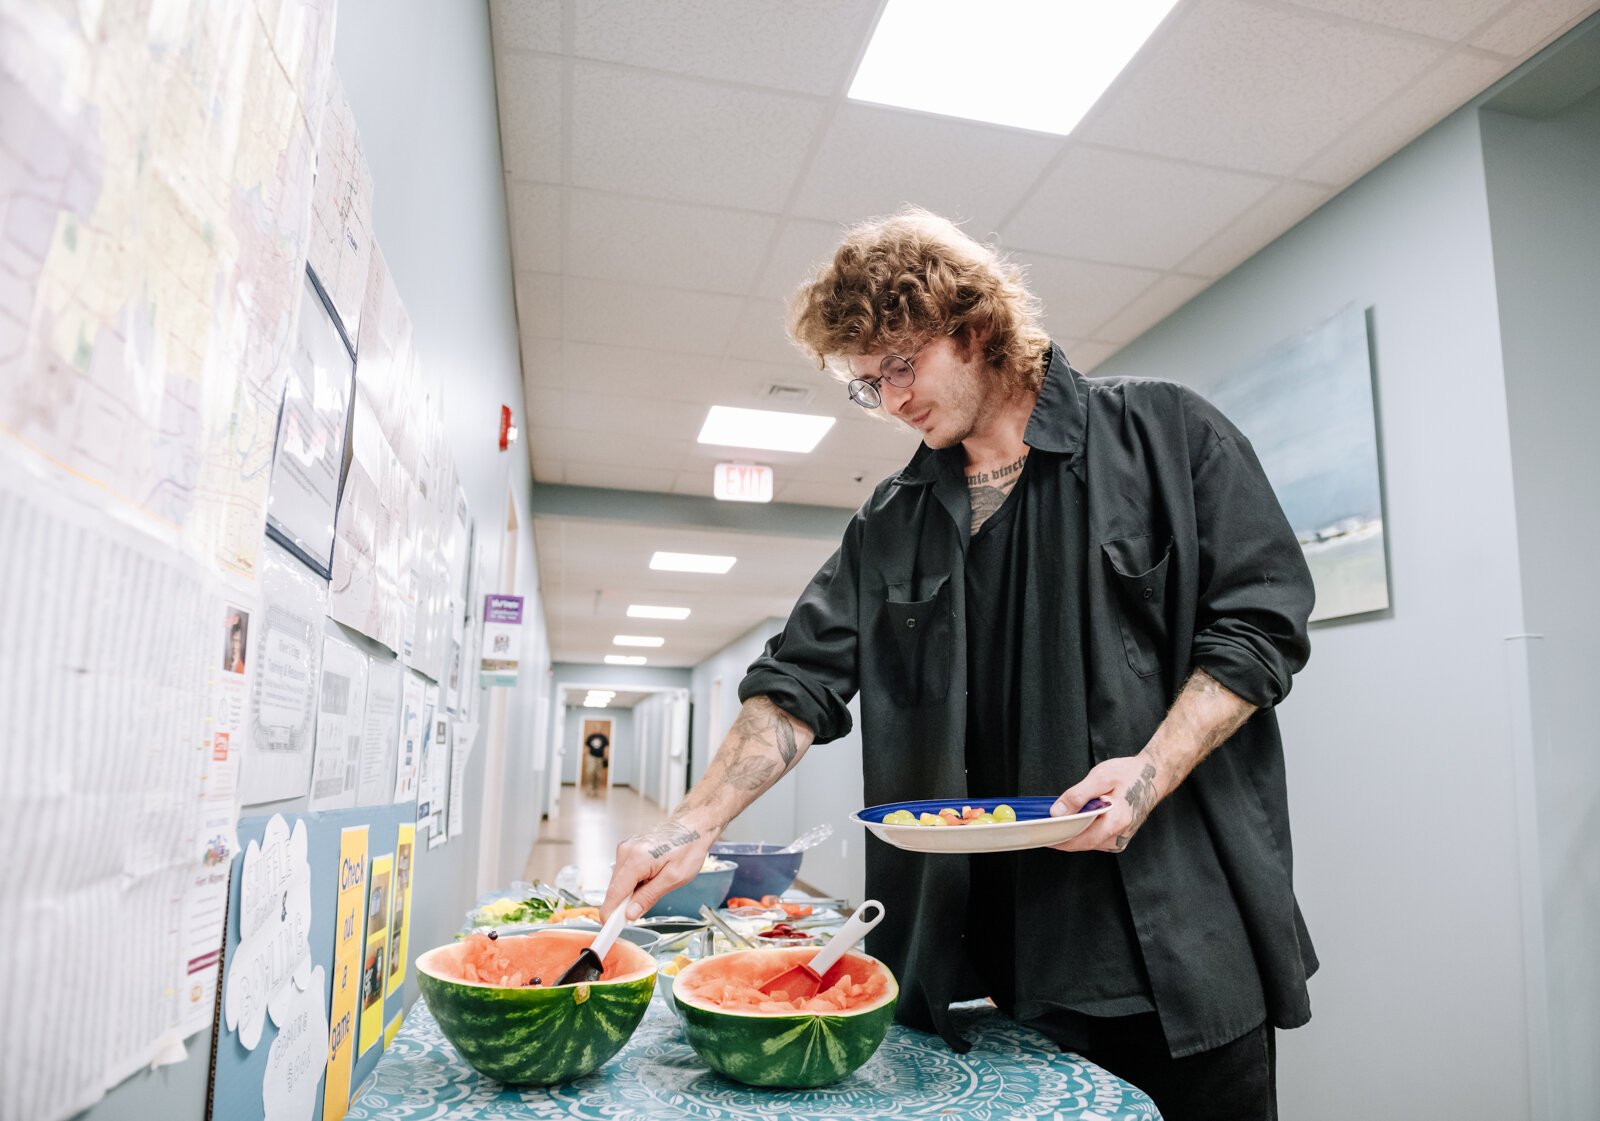 David Andrews dips a plate during "Super Saturday" a free monthly community meal for the housing members at River's Edge. River's Edge is a  supportive housing complex on Spy Run Ave. Ext. in Fort Wayne.